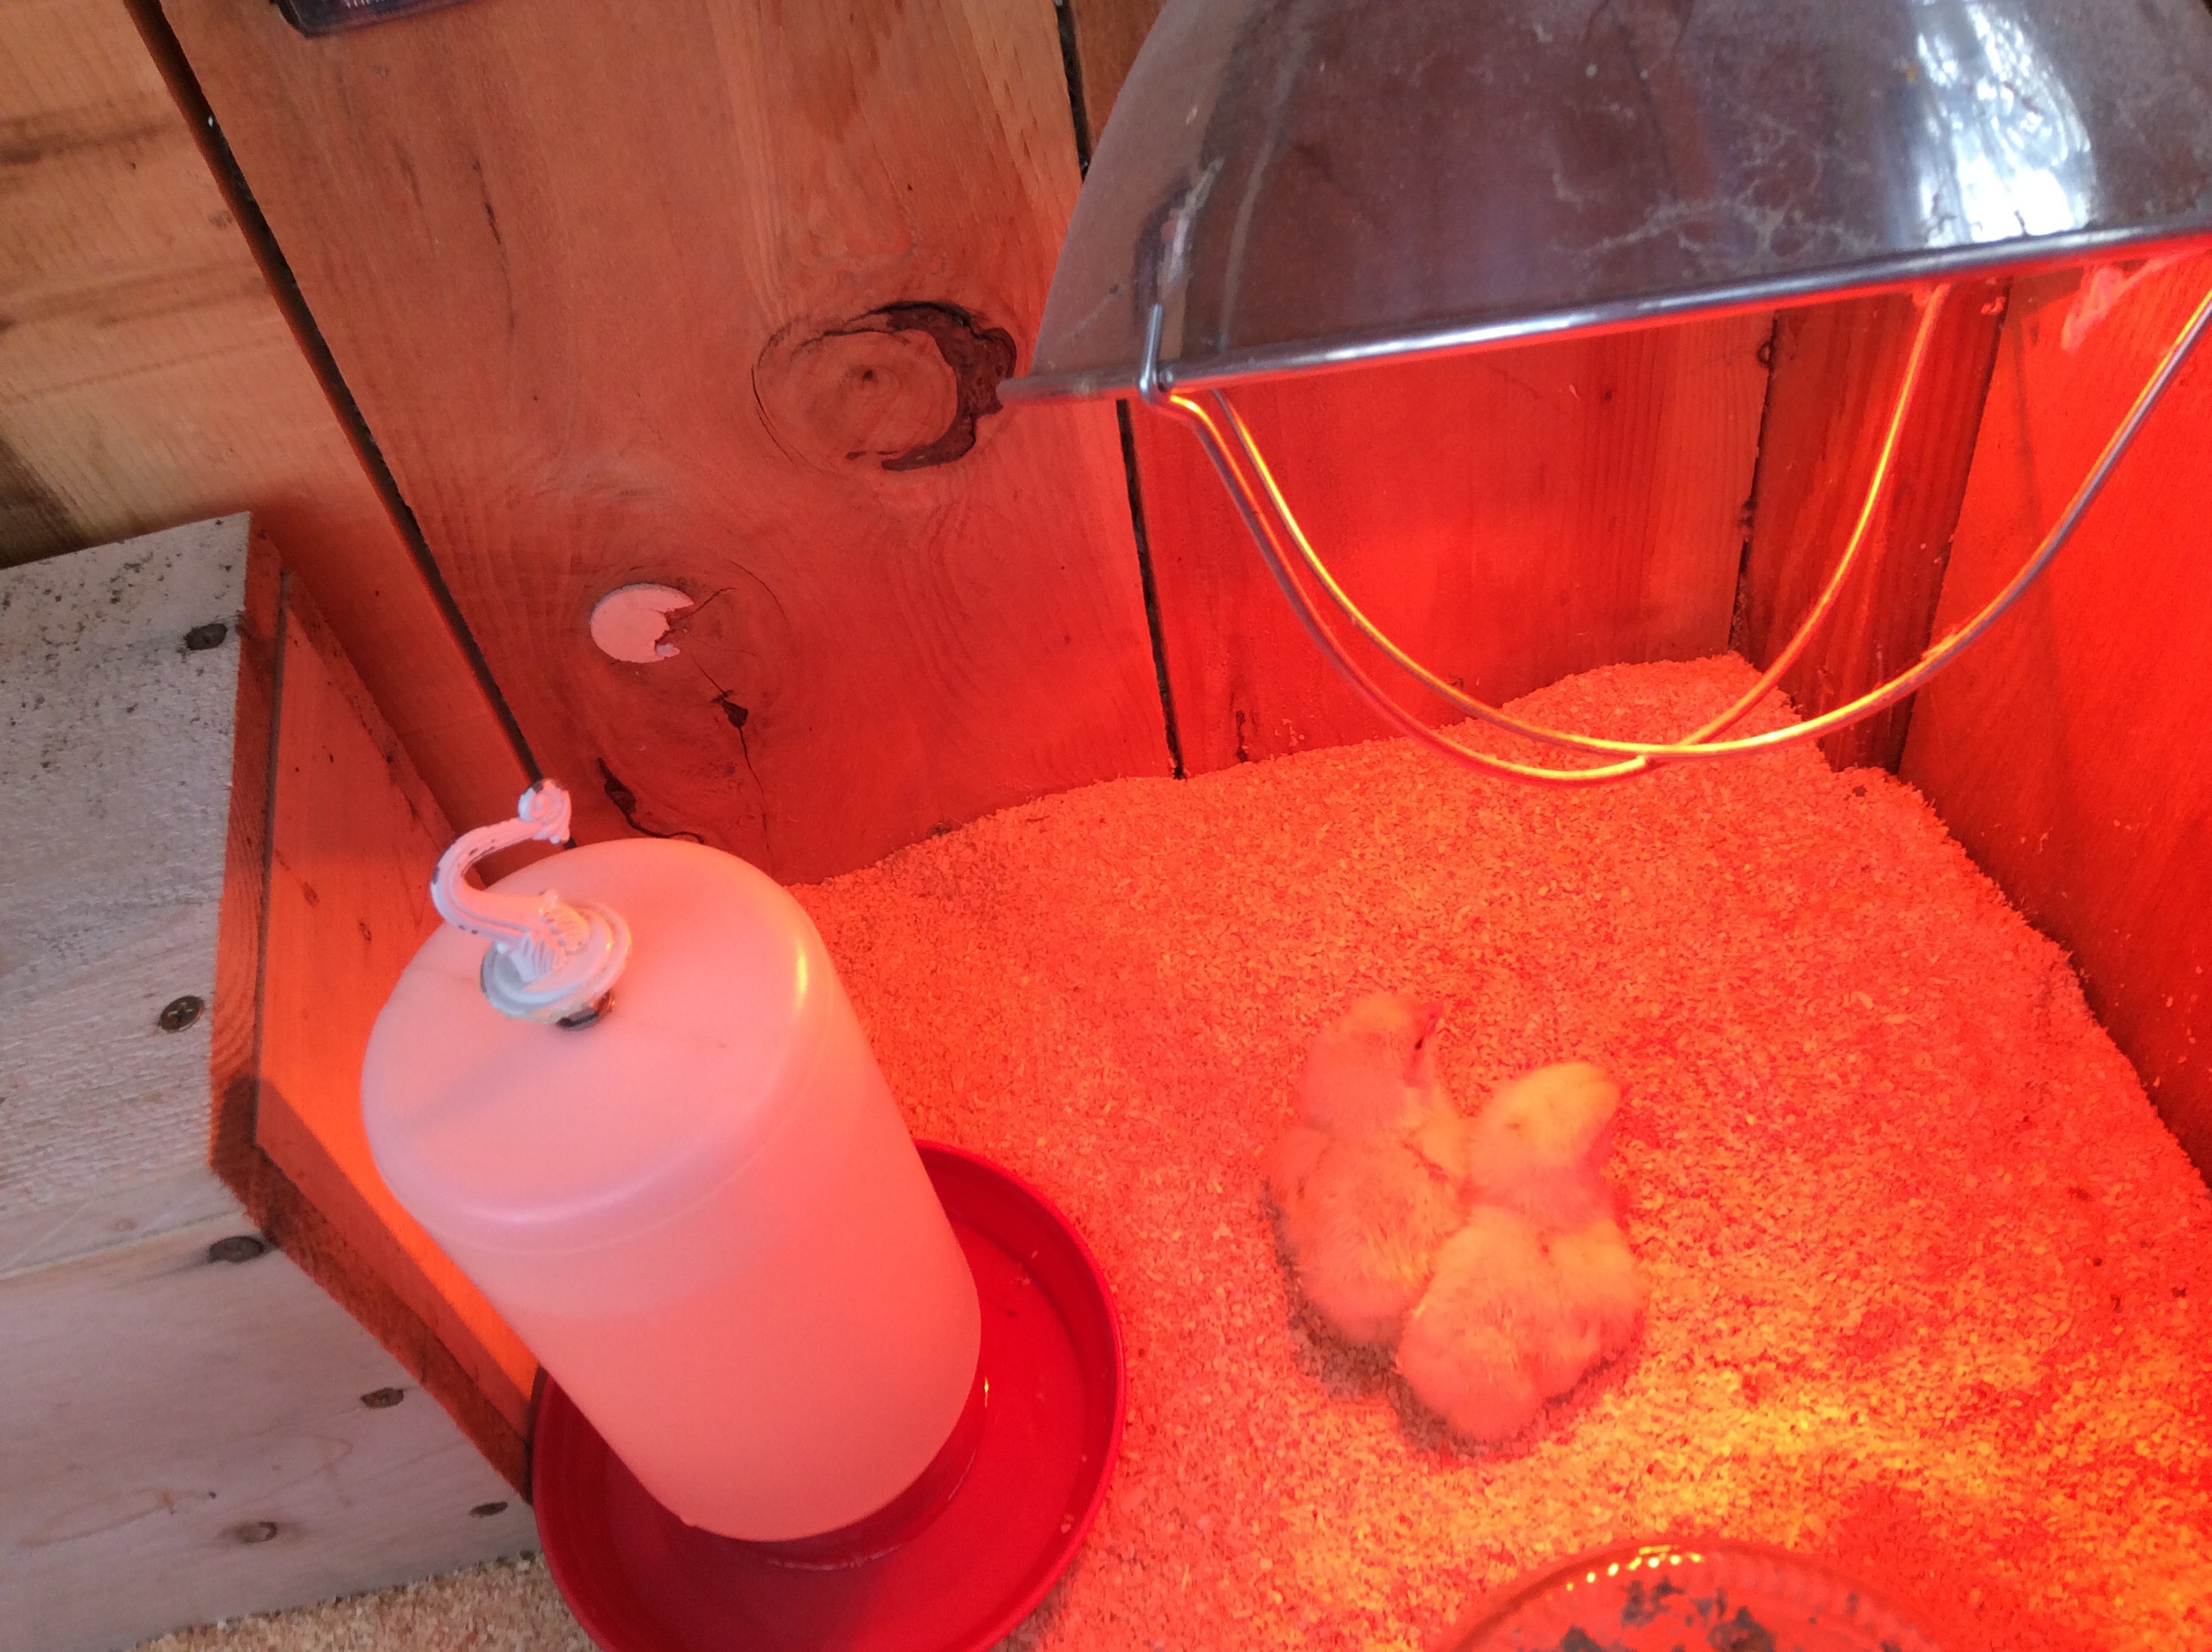 2 now in brooder, and awaiting 3 more to hatch!